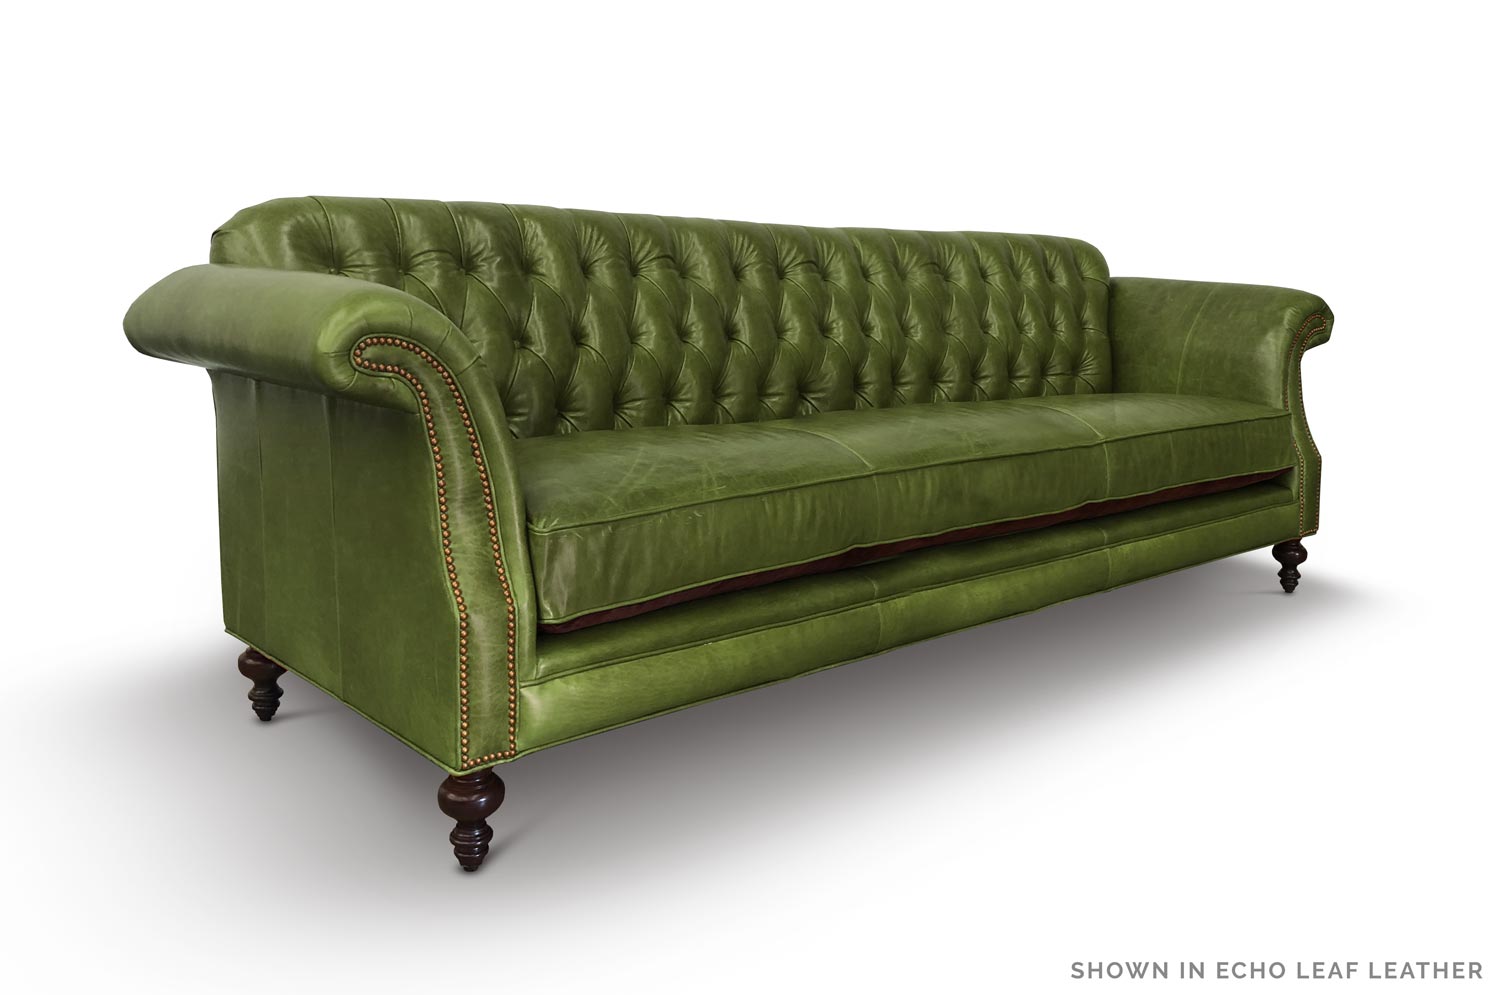 The Riley: High Back Scroll Arm Tufted Chesterfield Sofa in Echo Leaf Leather